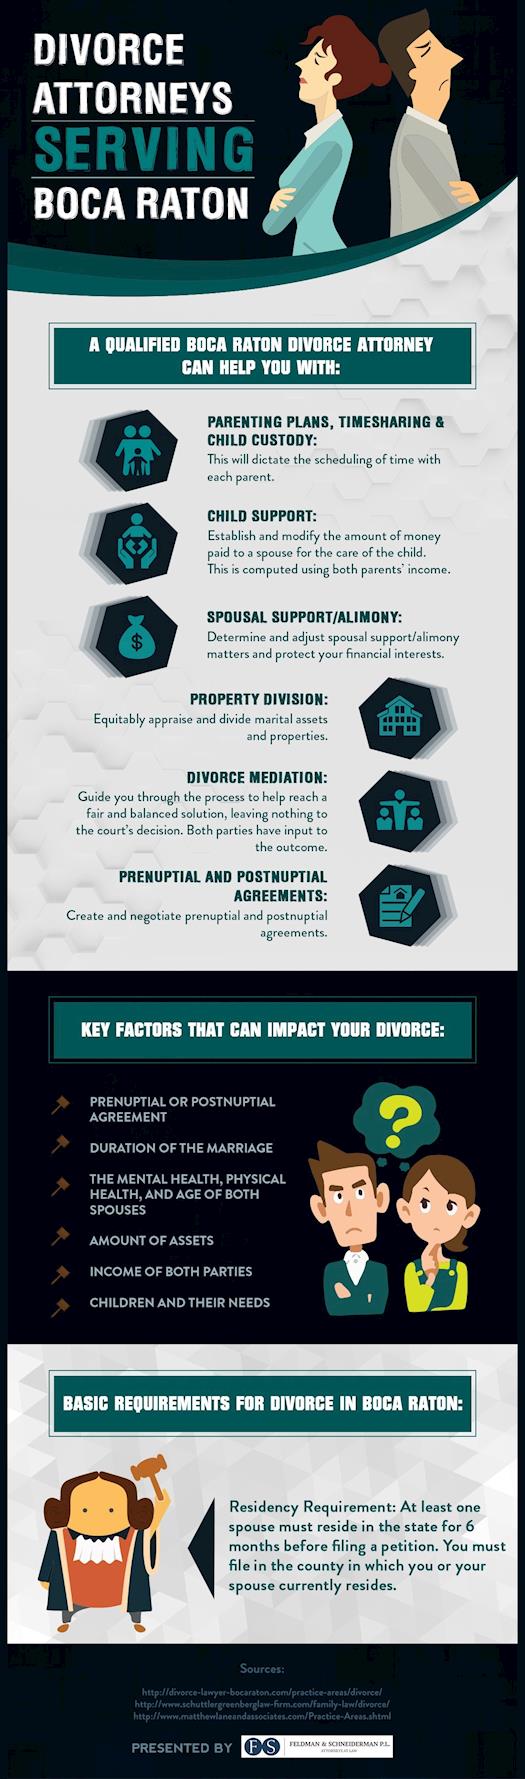 The Benefits of Hiring a Qualified Boca Raton Divorce Attorney